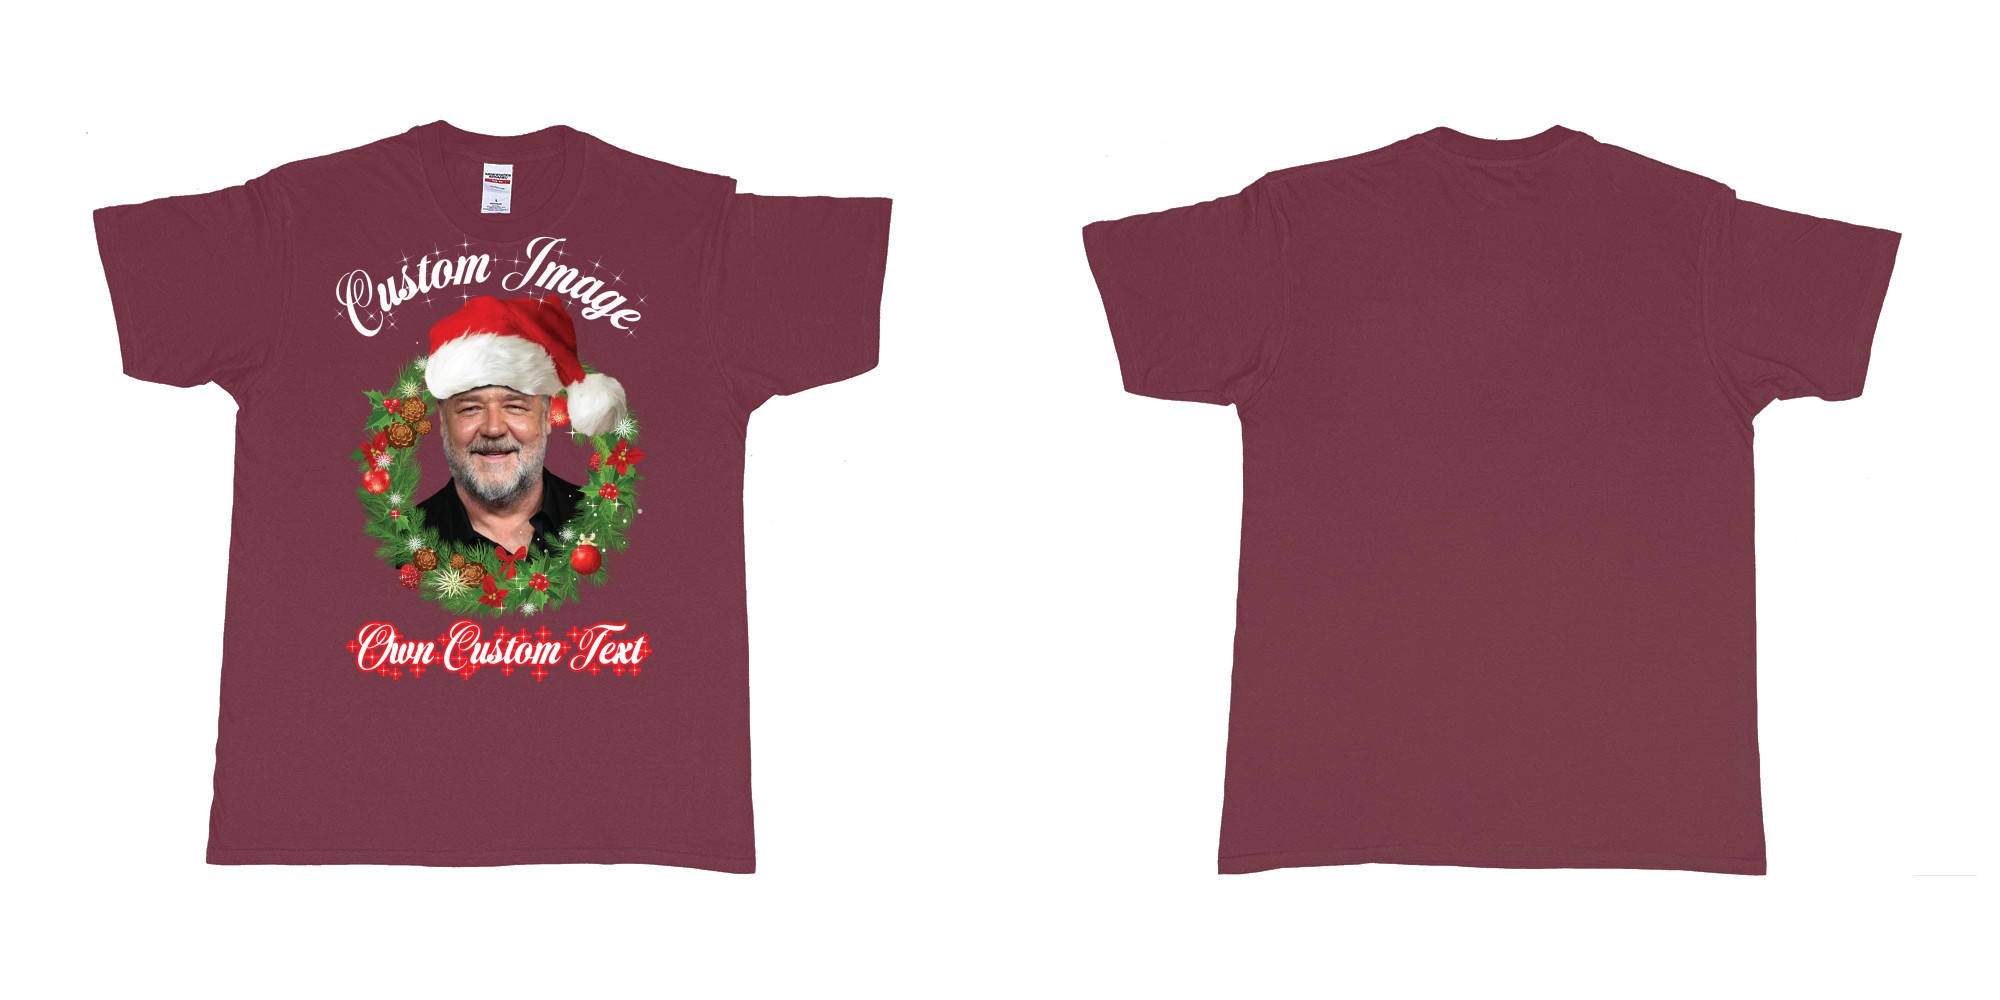 Custom tshirt design christmas wreath custom face image text in fabric color marron choice your own text made in Bali by The Pirate Way